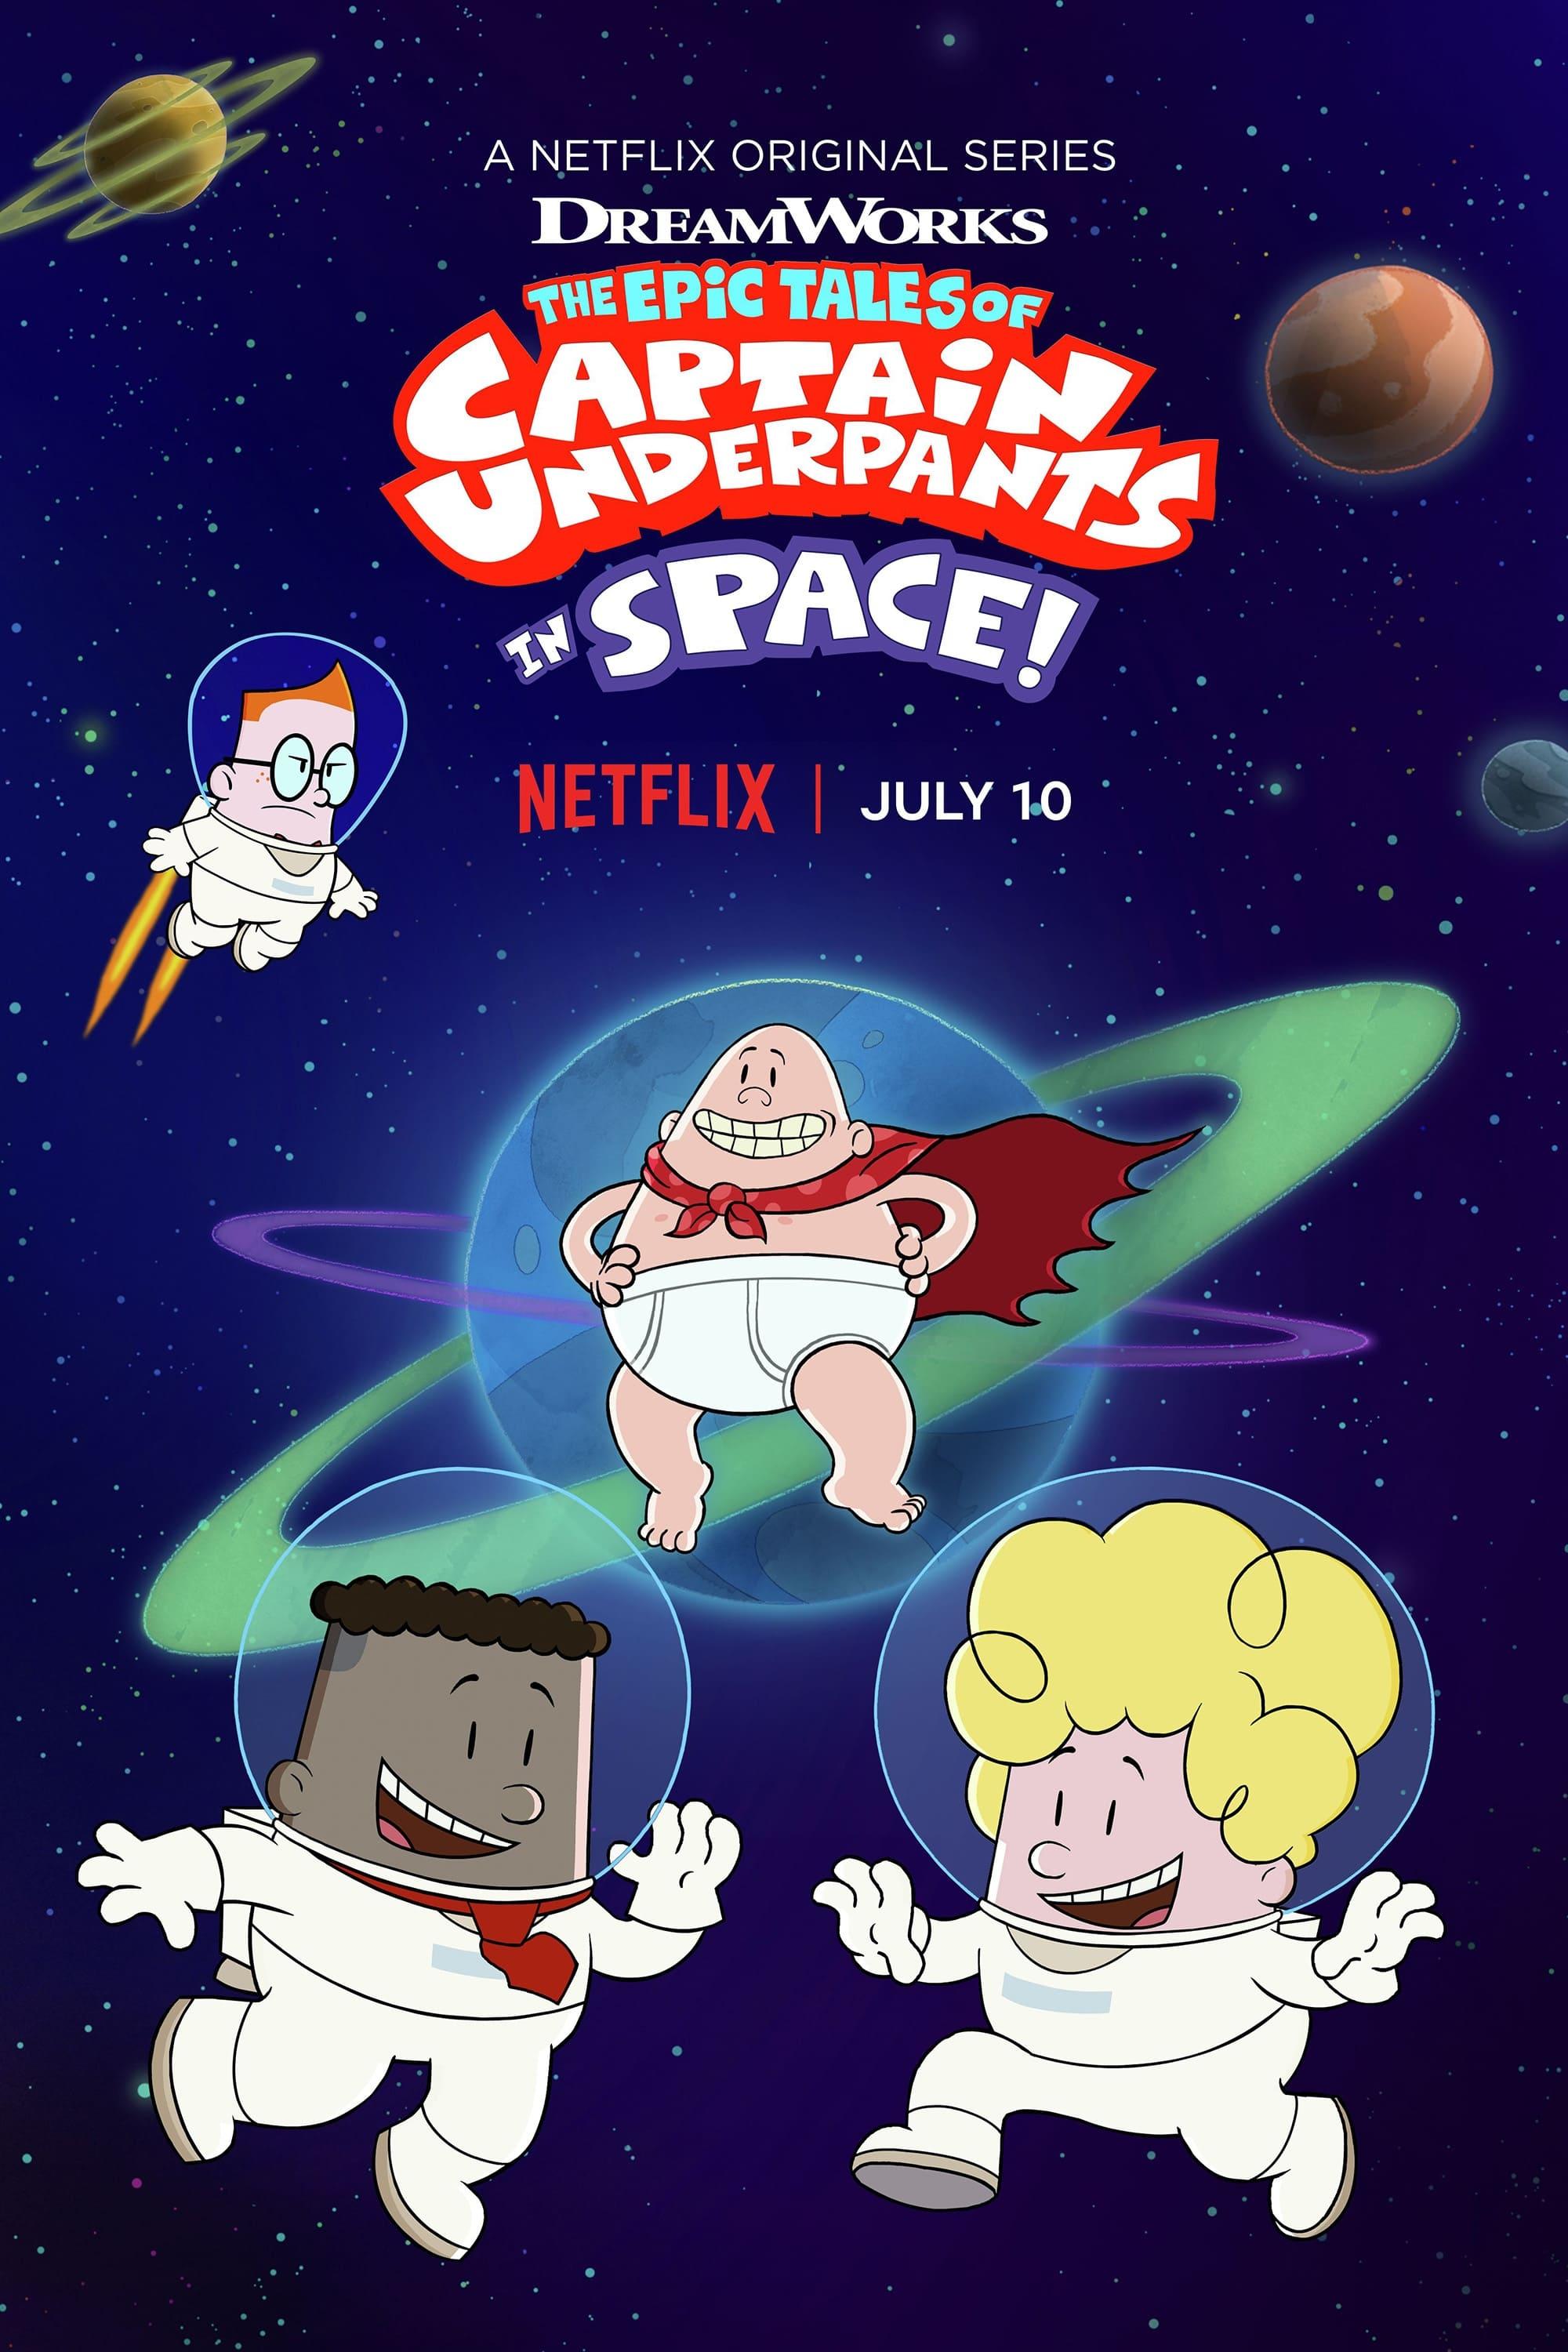 The Epic Tales of Captain Underpants in Space poster